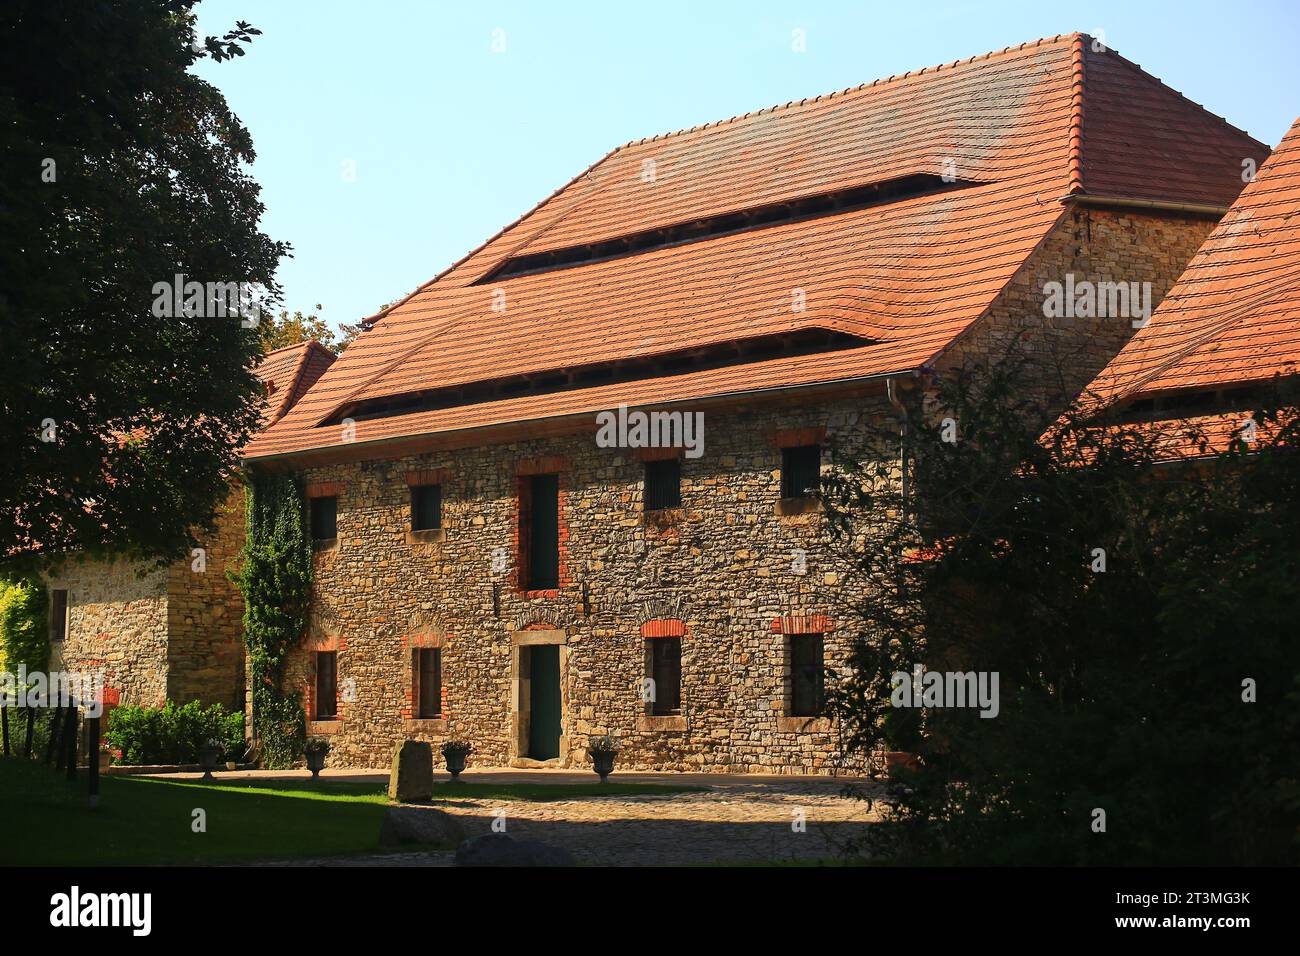 Rural house in the castle of Wanzleben, Germany. Stock Photo